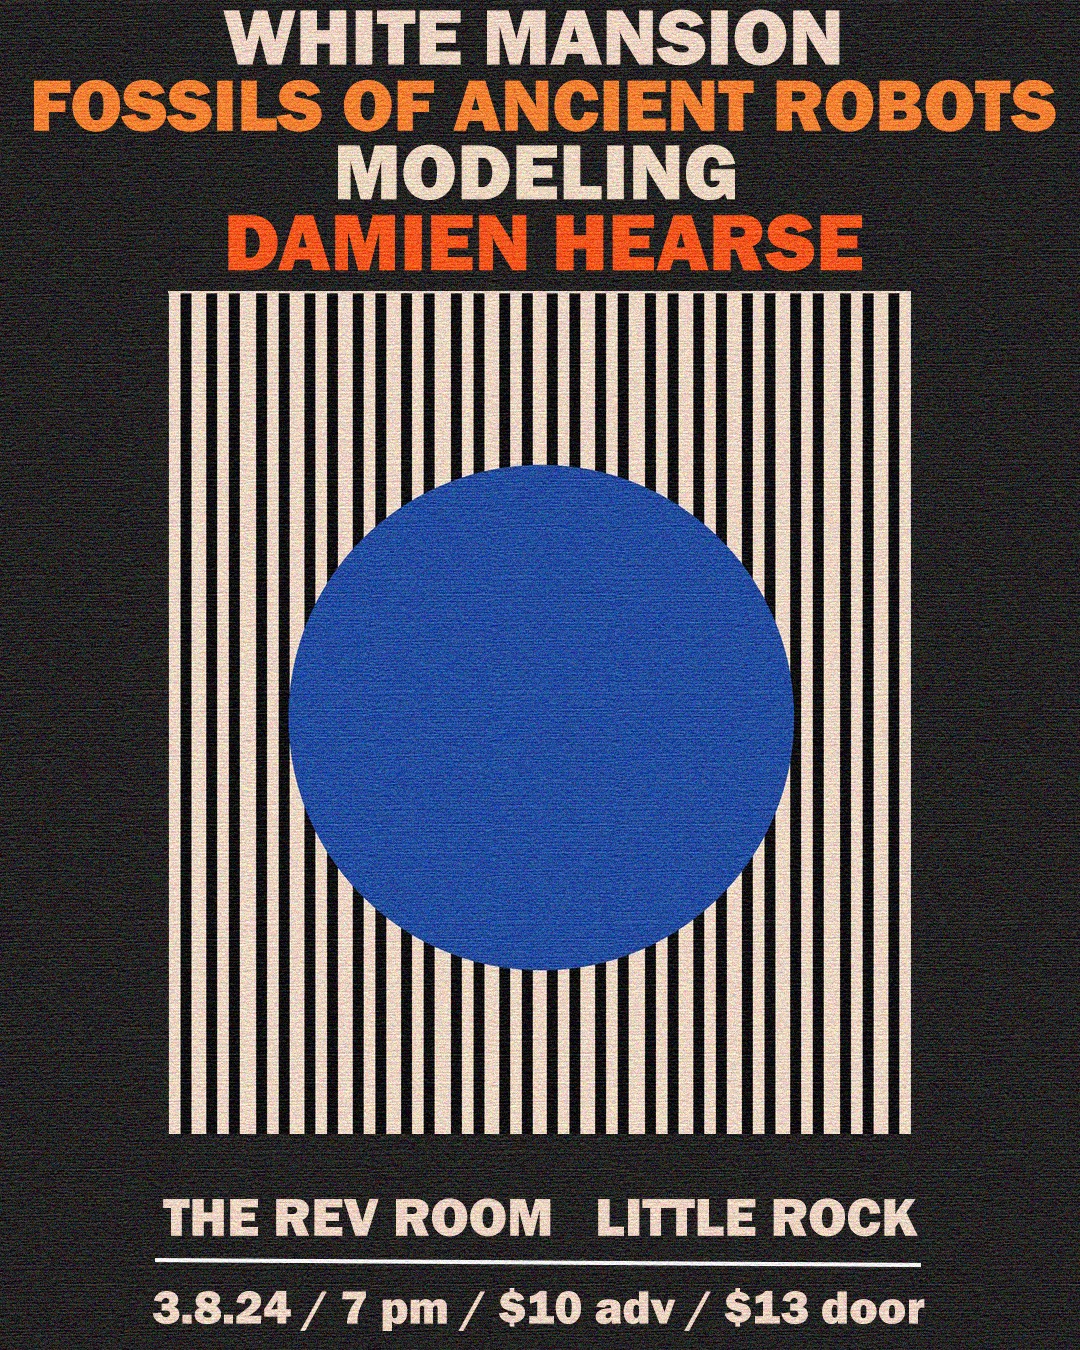 This flyer has a black background, there is a box of white and black stripes with a large blue dot in the center. The text in the image reads, &ldquo;White Mansion, Fossils of Ancient Robots, Modeling, and Damien Hearse. At The Rev Room, 300 President Clinton Avenue, Little Rock, Arkansas. On Friday, March 8, 2024. Starts at 7 PM, $10 advance tickets, $13 at the door. Go to revroom.com for more info.&rdquo;